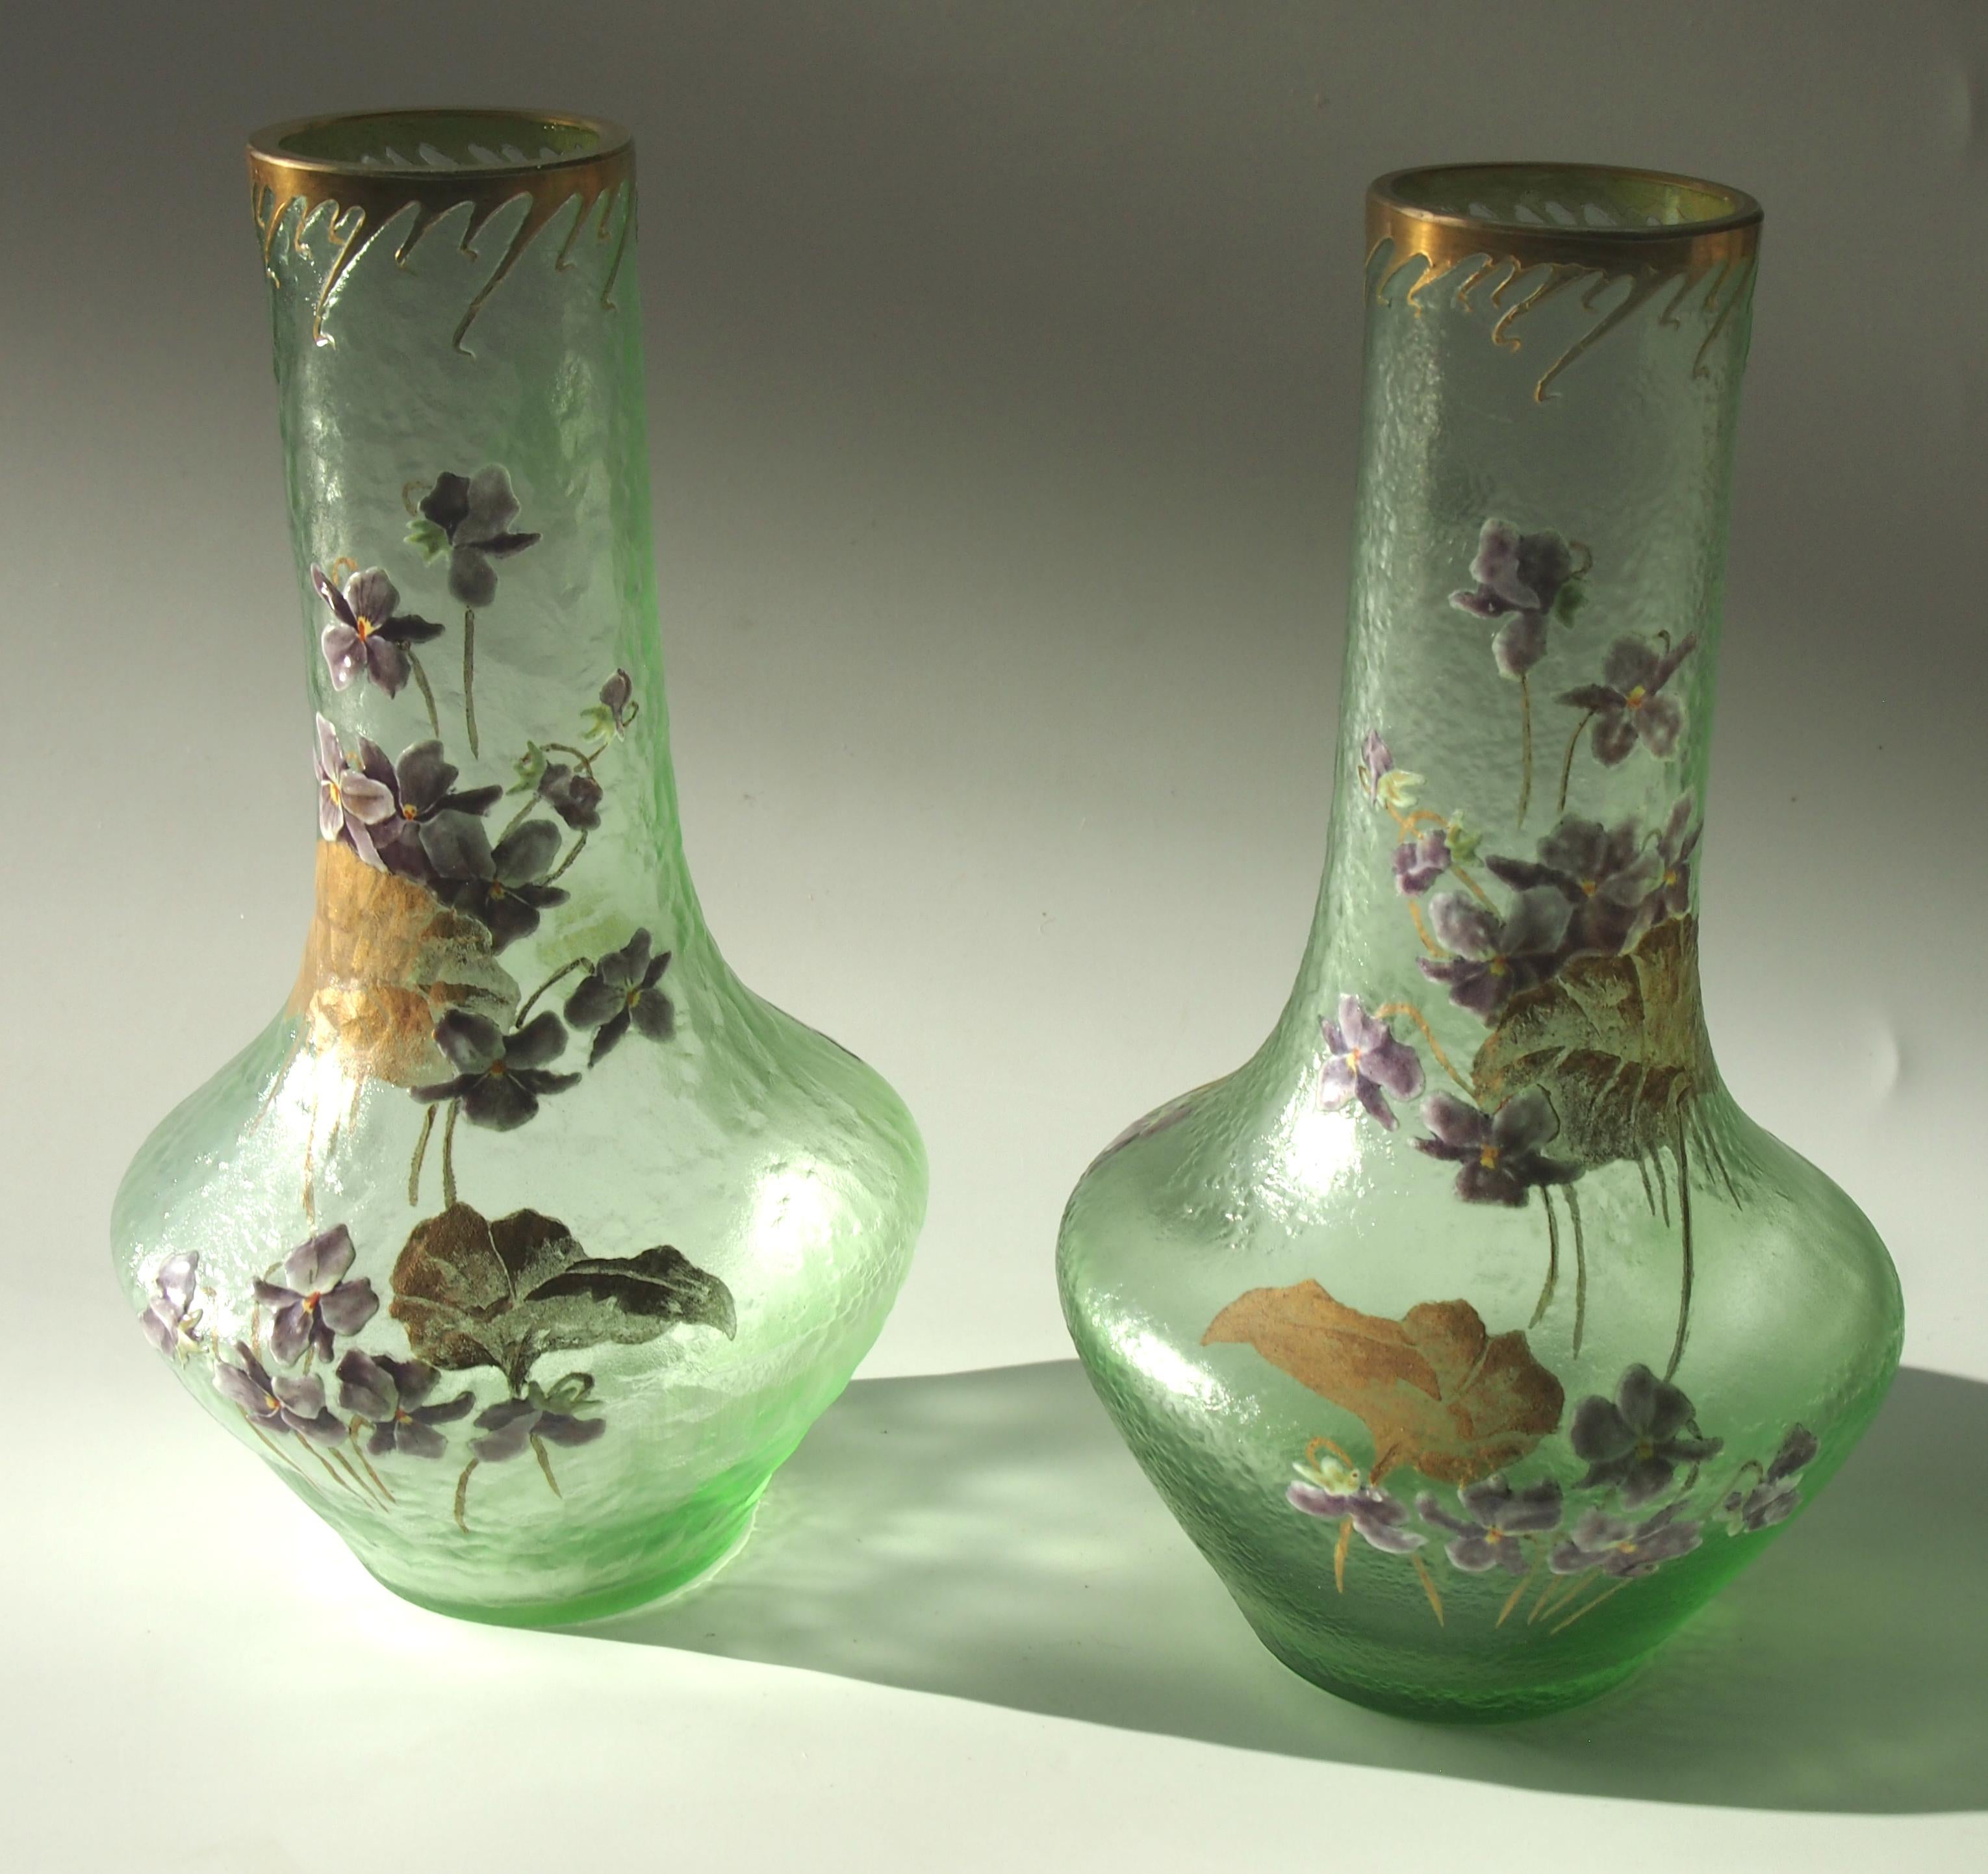 A superb signed true pair of early Art Nouveau green acid cut back Legras vases gilded and finely enameled with blooming violets in purple and white -Both signed with the Legras - Monte Joye L Co signature (slightly worn signatures).

Legras at